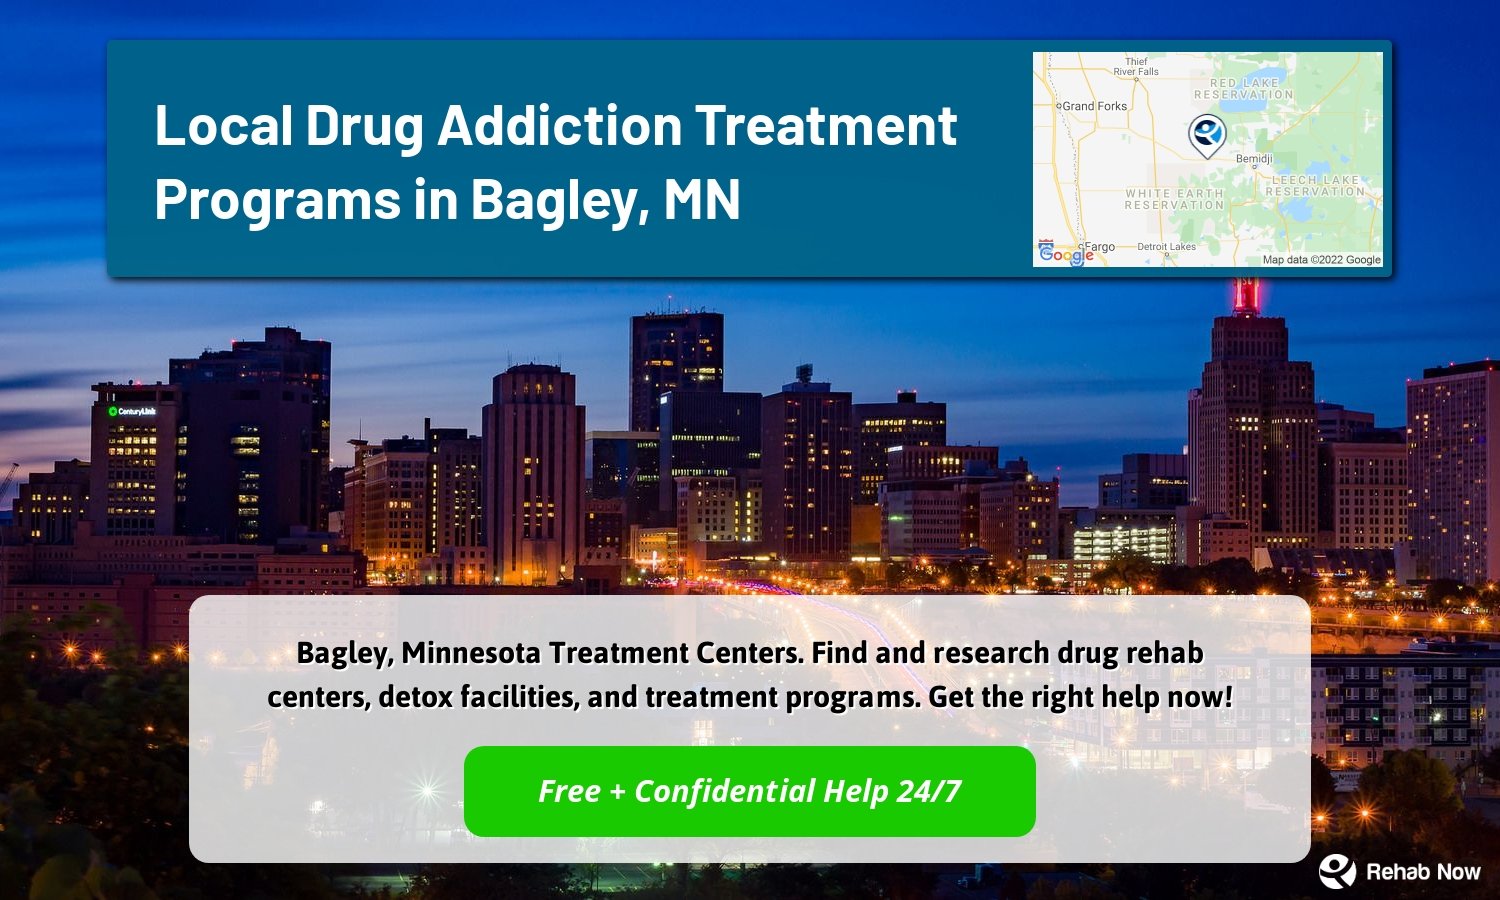 Bagley, Minnesota Treatment Centers. Find and research drug rehab centers, detox facilities, and treatment programs. Get the right help now!